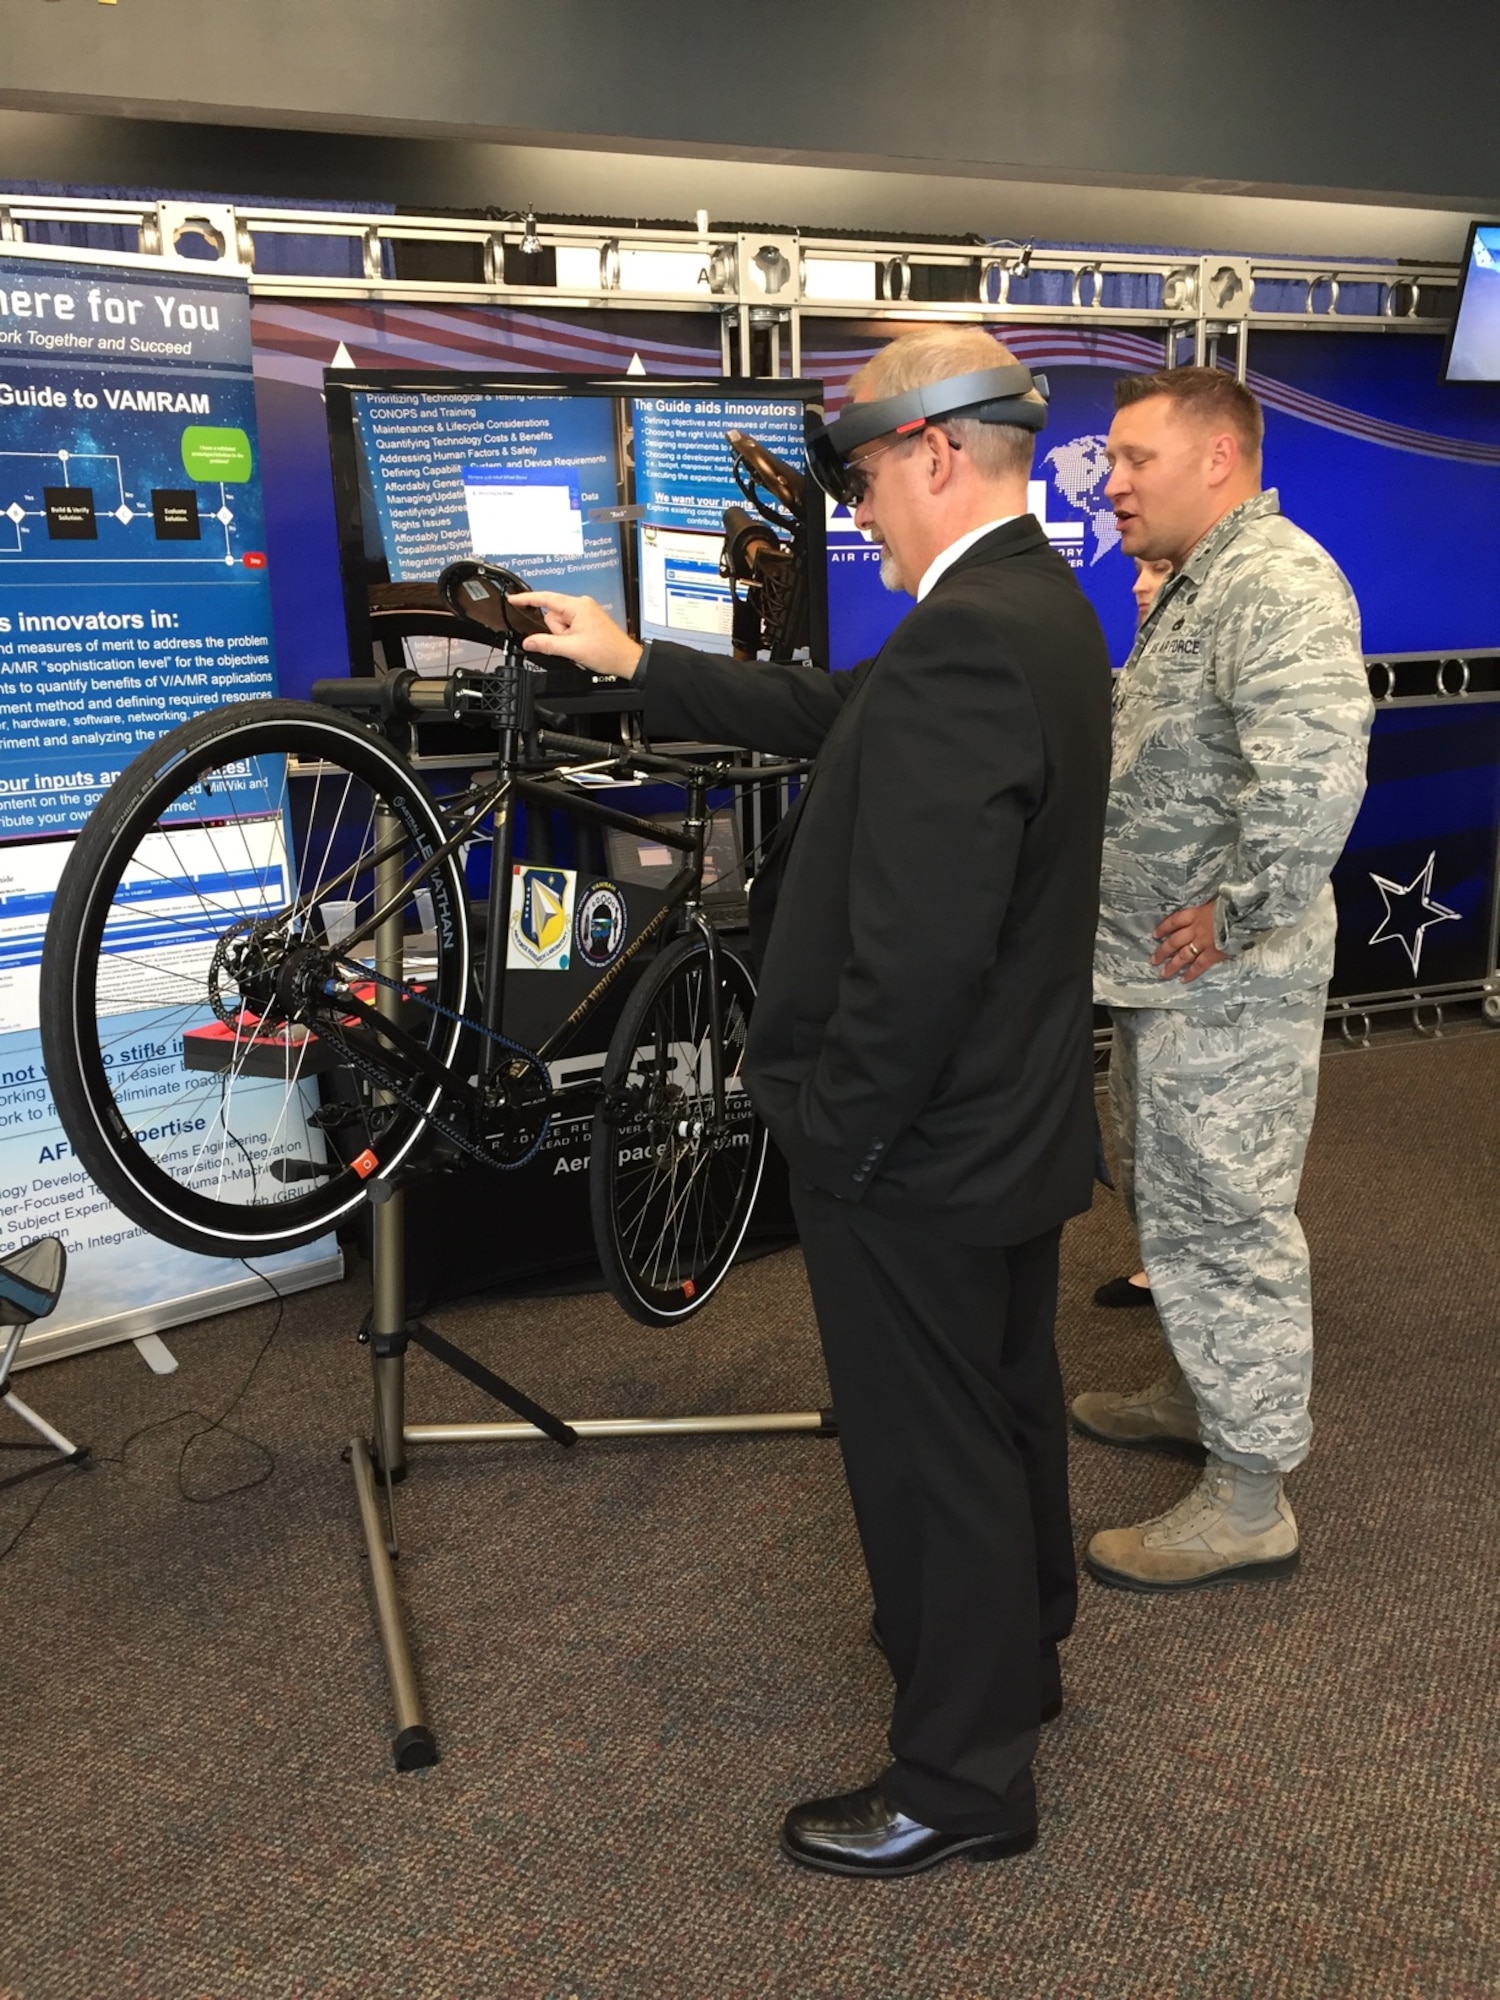 Dr. Michael Gregg (left), director of the Air Force Research Laboratory Aerospace Systems Directorate, uses a mixed-reality application to change the tire on a Wright Cycle Company bicycle as Capt. David Eisensmith guides the process. The demonstration, on display at the 2019 Air Vehicles Technology Symposium, is part of the Virtual, Augmented, and Mixed Reality for Aircraft Maintenance team’s effort to show the technology’s potential for future aircraft maintenance. (U.S. Air Force Photo)